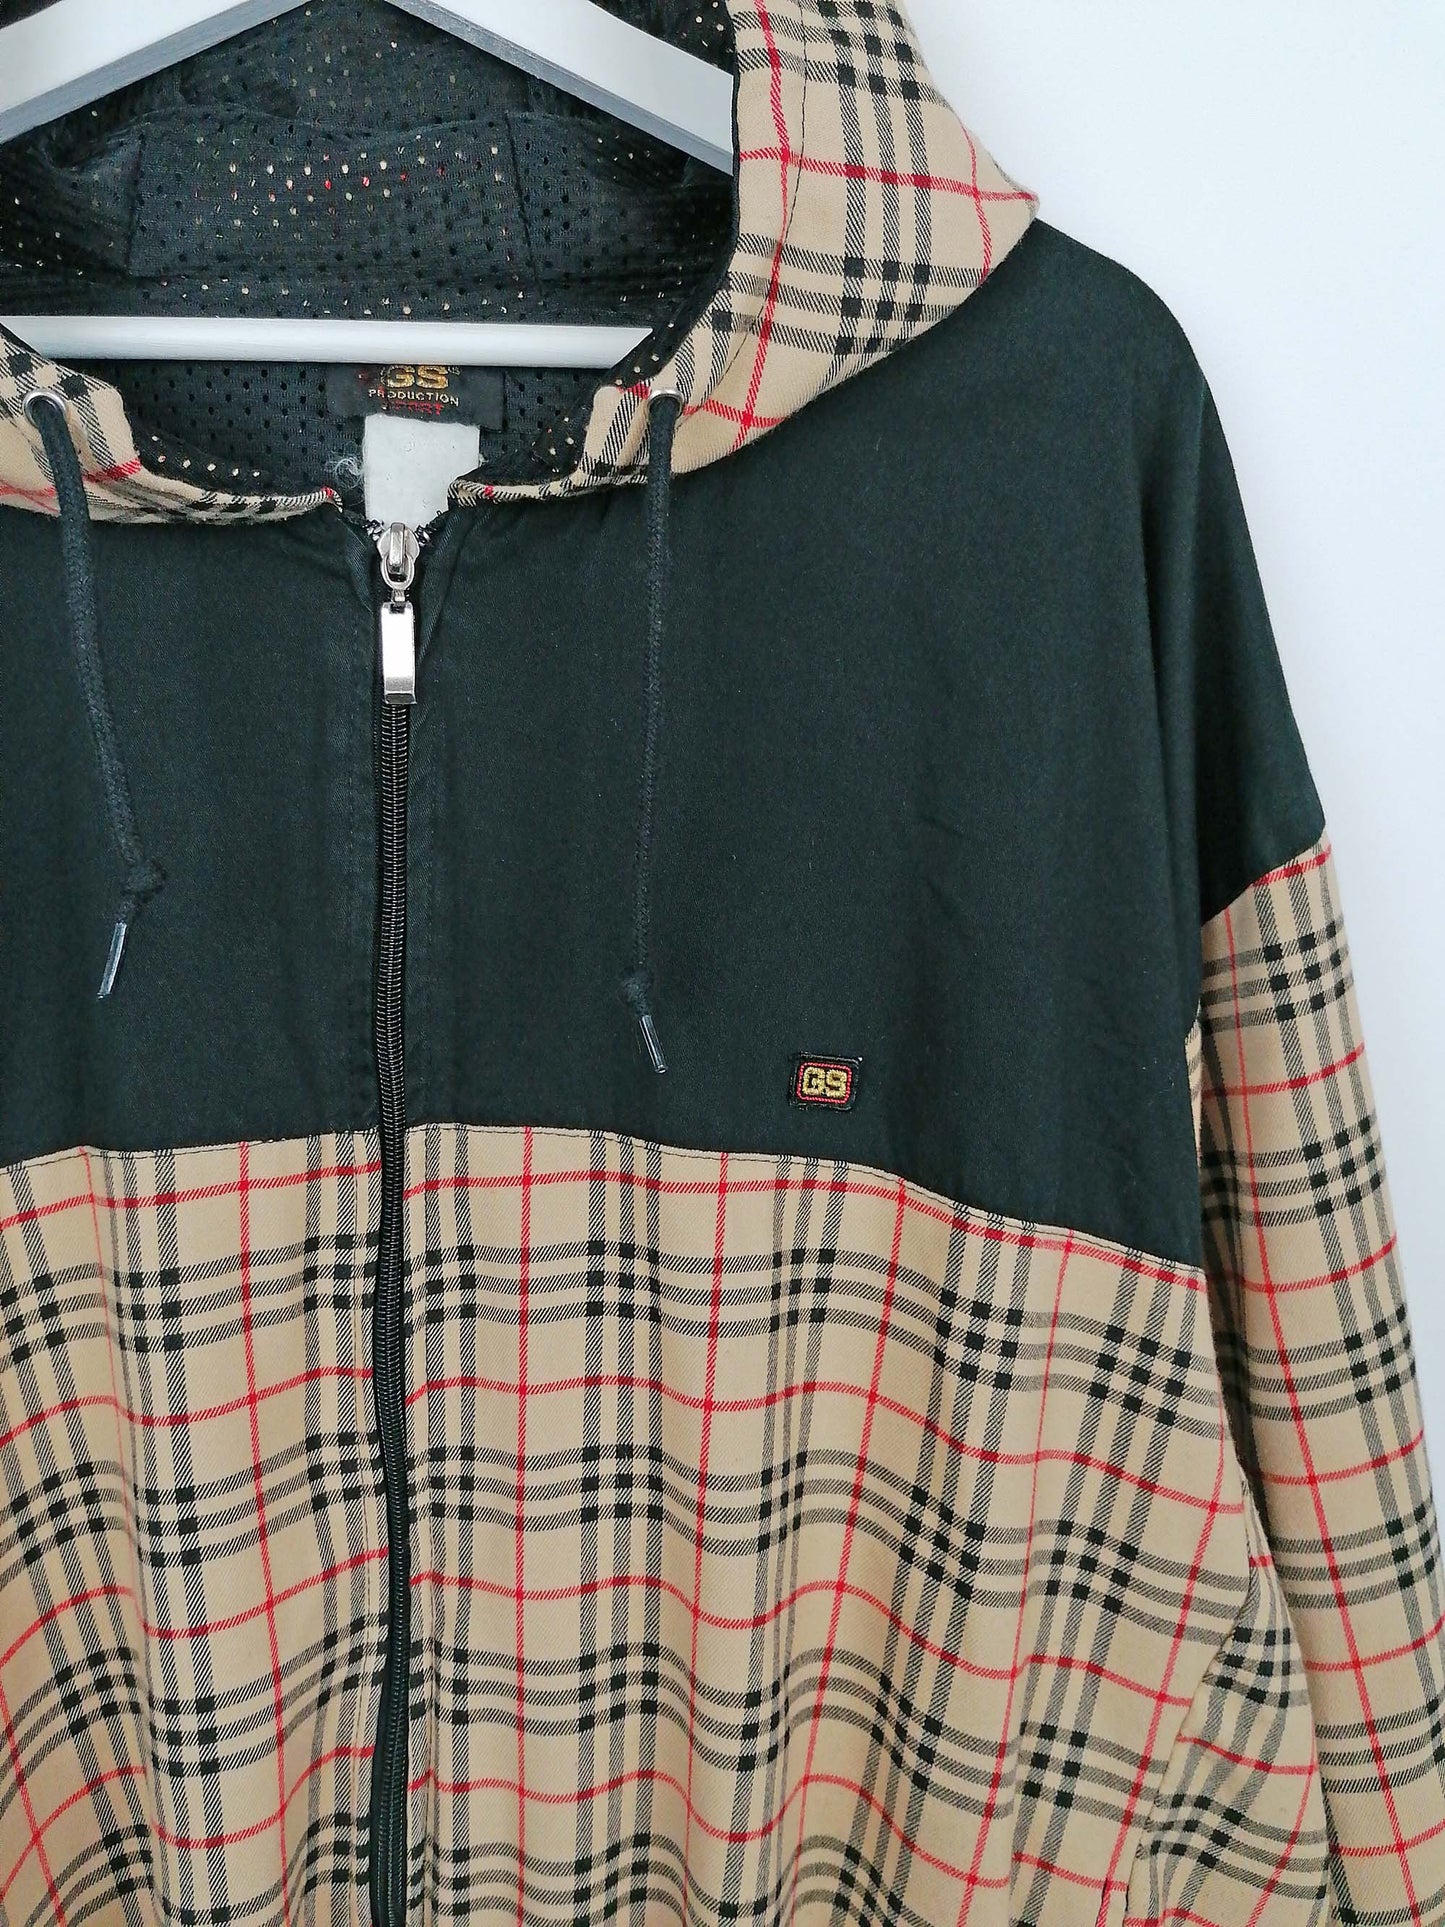 90's Y2K Plaid Check Oversized Lightweight Bomber Jacket with Hood - size XXL